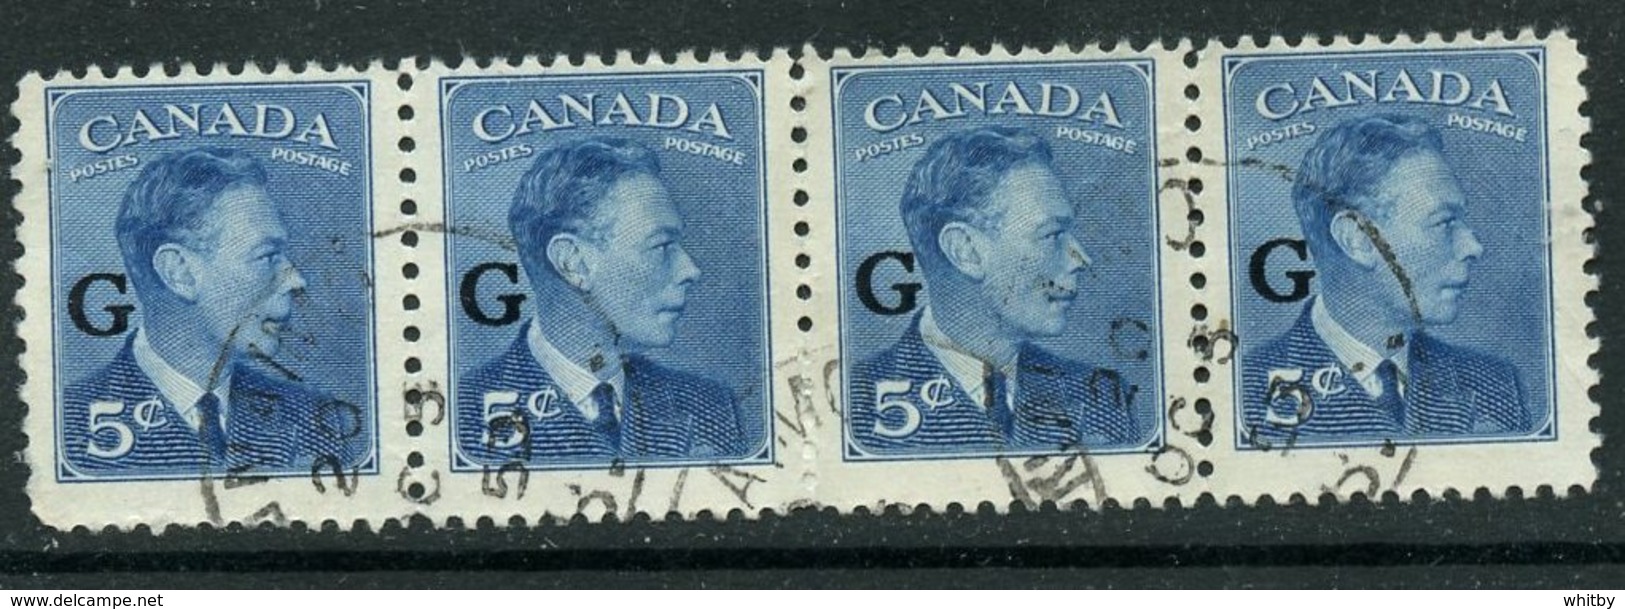 Canada 1950 5 Cent King George VI G Overprint Issue #O20 Strip Of 4 - Sovraccarichi